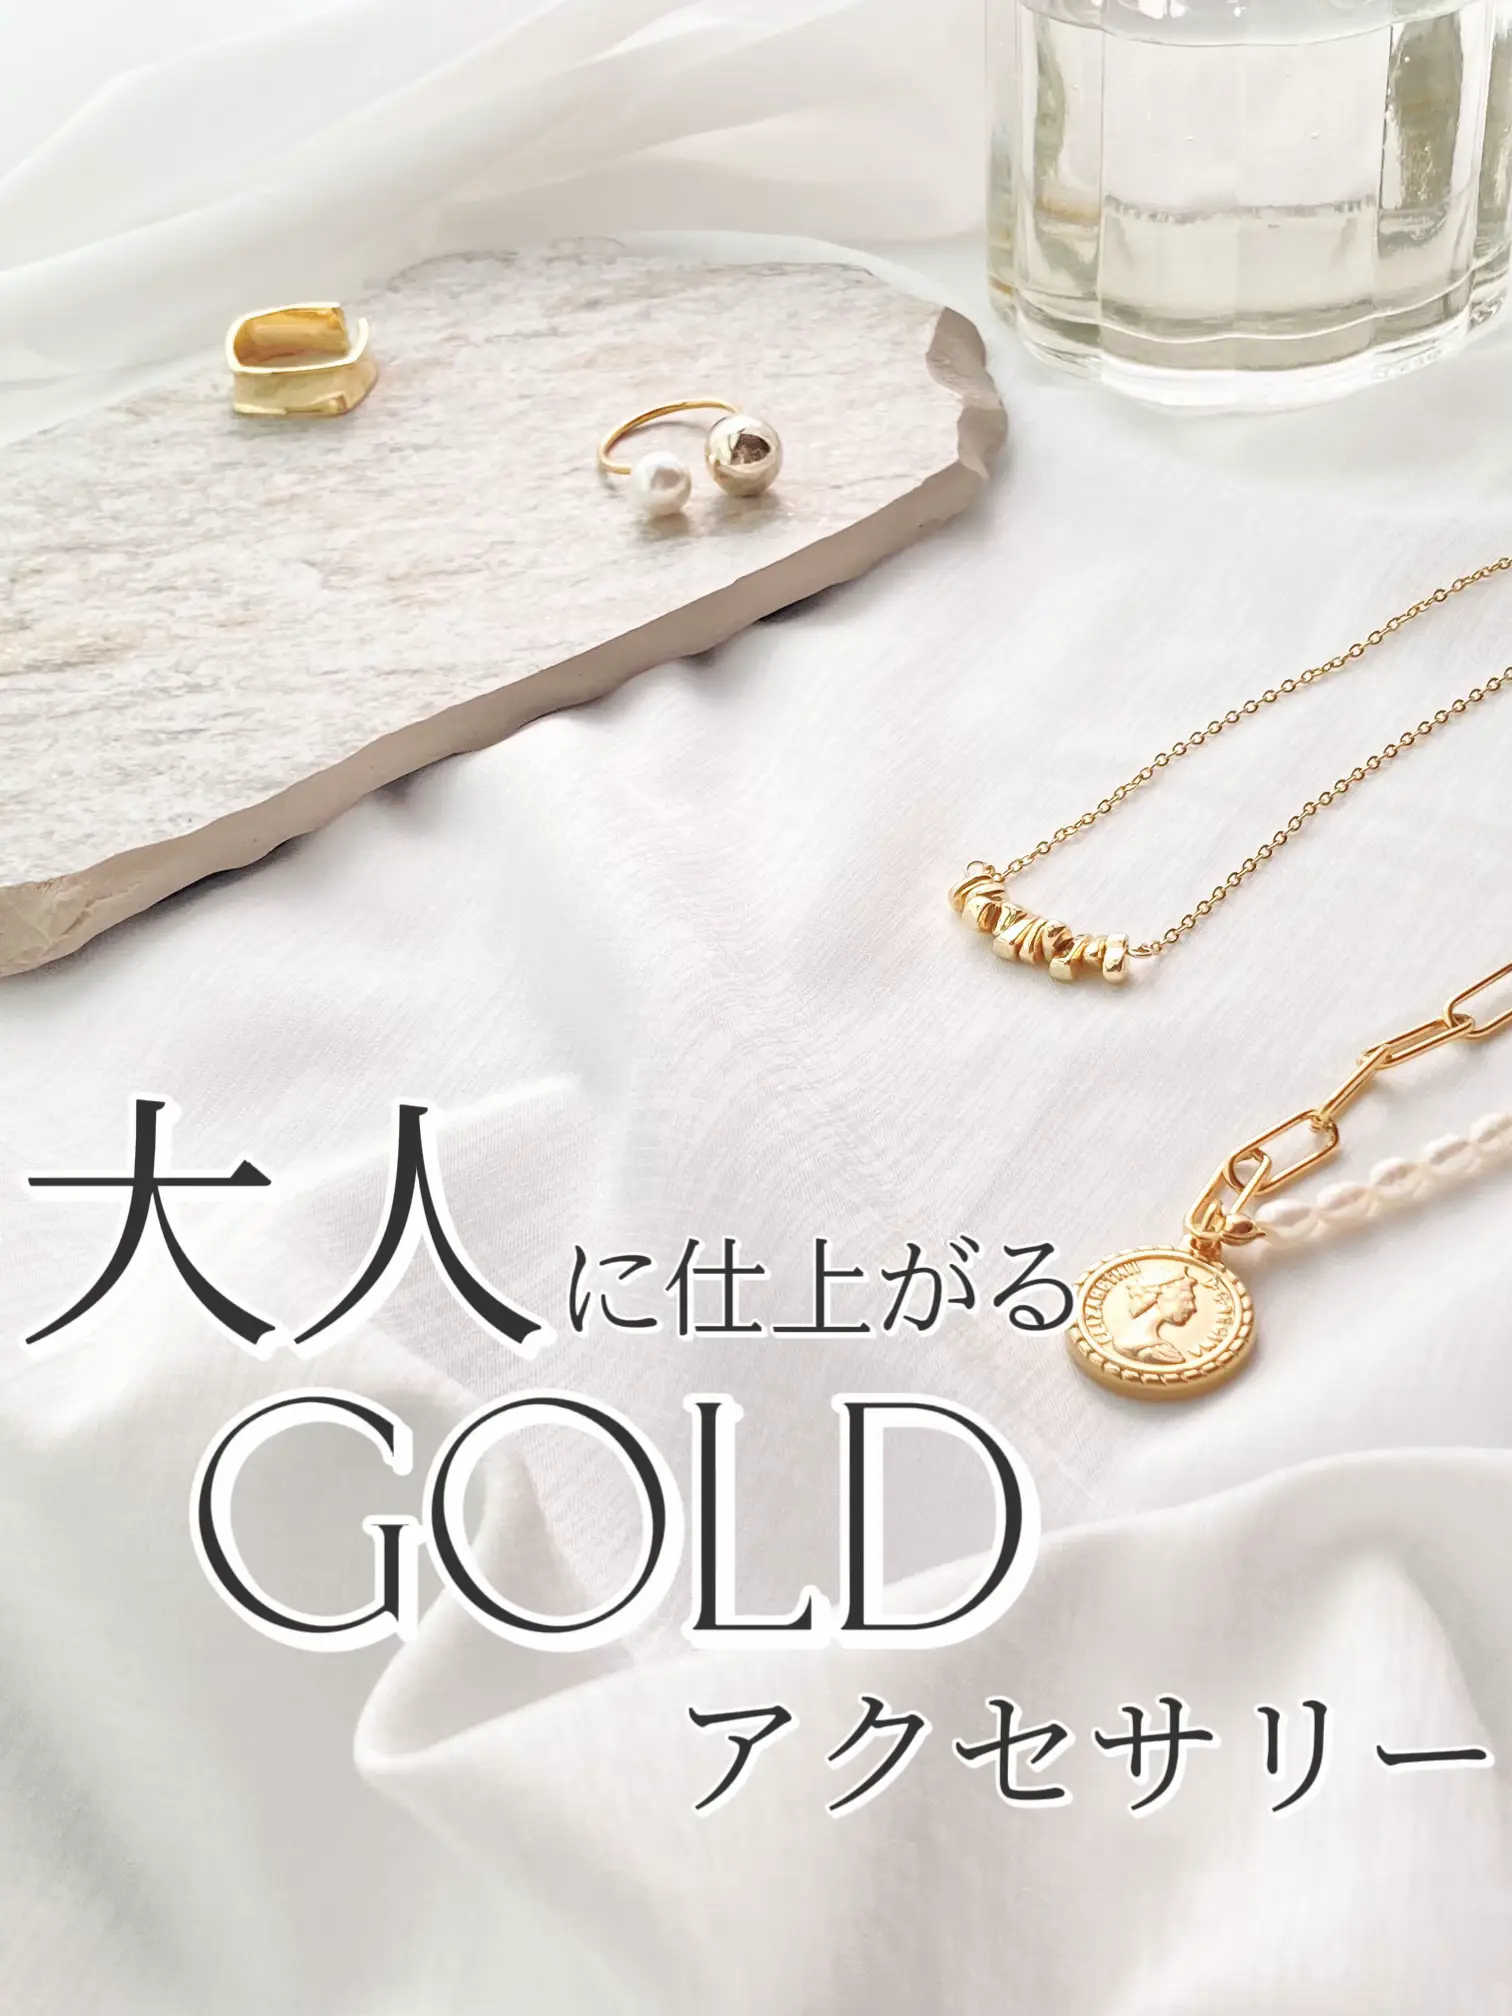 Gold Accessories for Adults✨ | Gallery posted by 𝐏𝐞𝐫𝐟𝐮𝐦𝐞